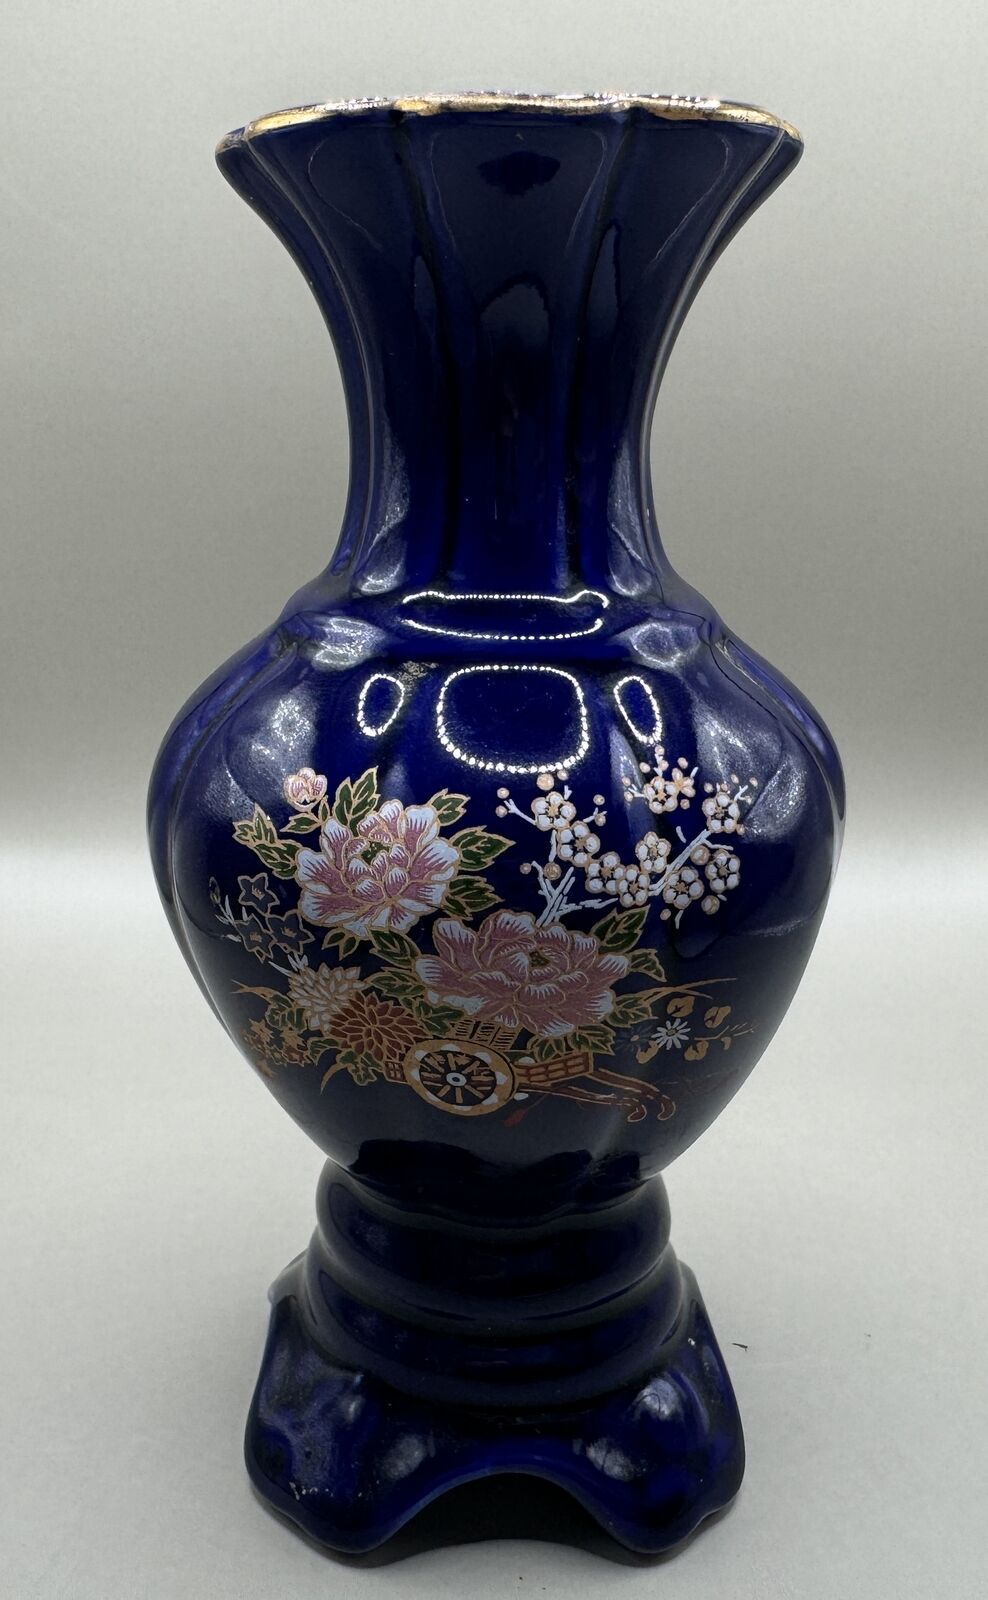 Le Petit Home Italy  Vase, Dark Blue Ceramic with Gold and Floral Accents